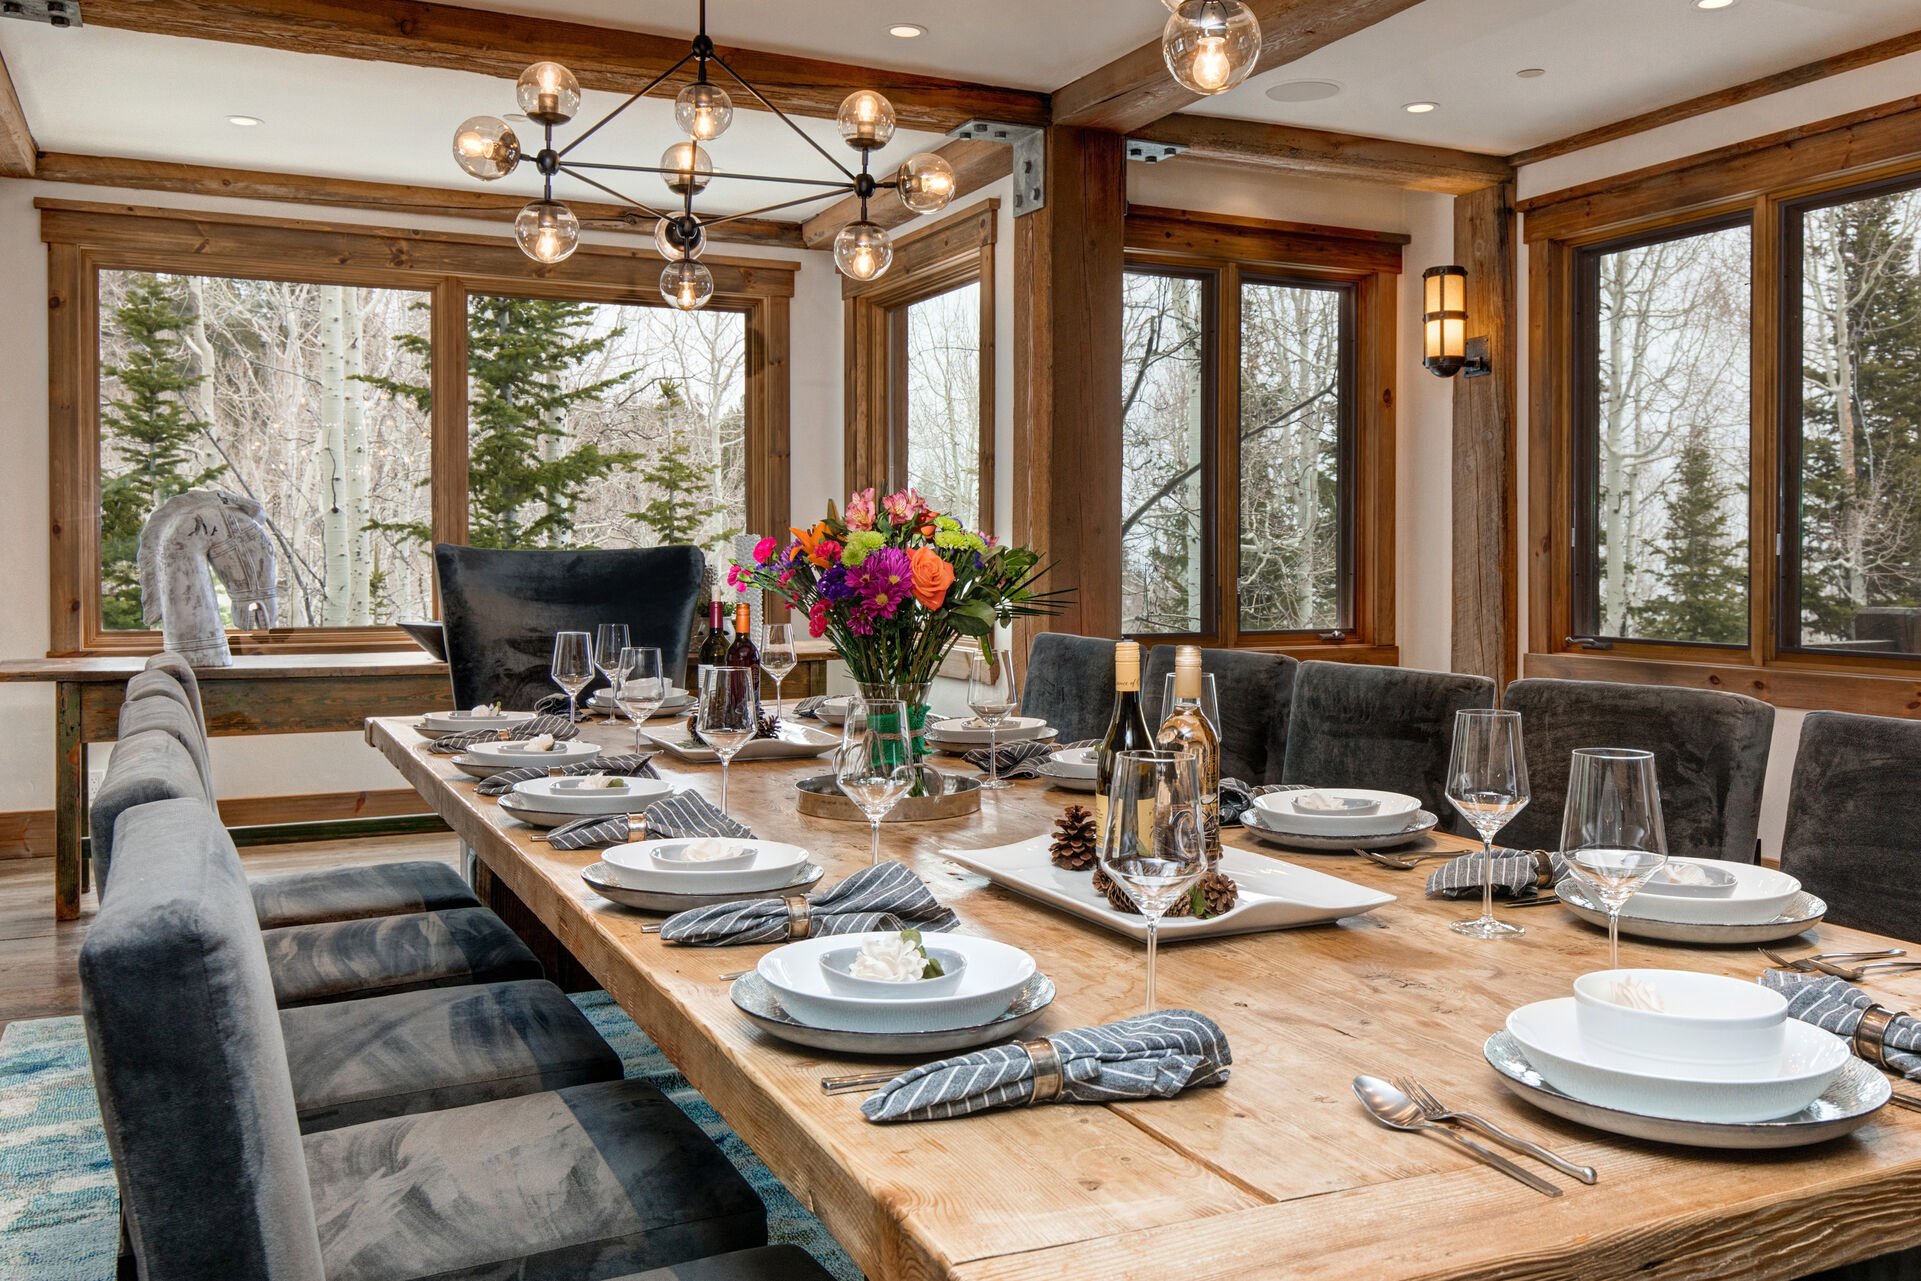 Dining Room with gas fireplace, stunning views, and seating for 12